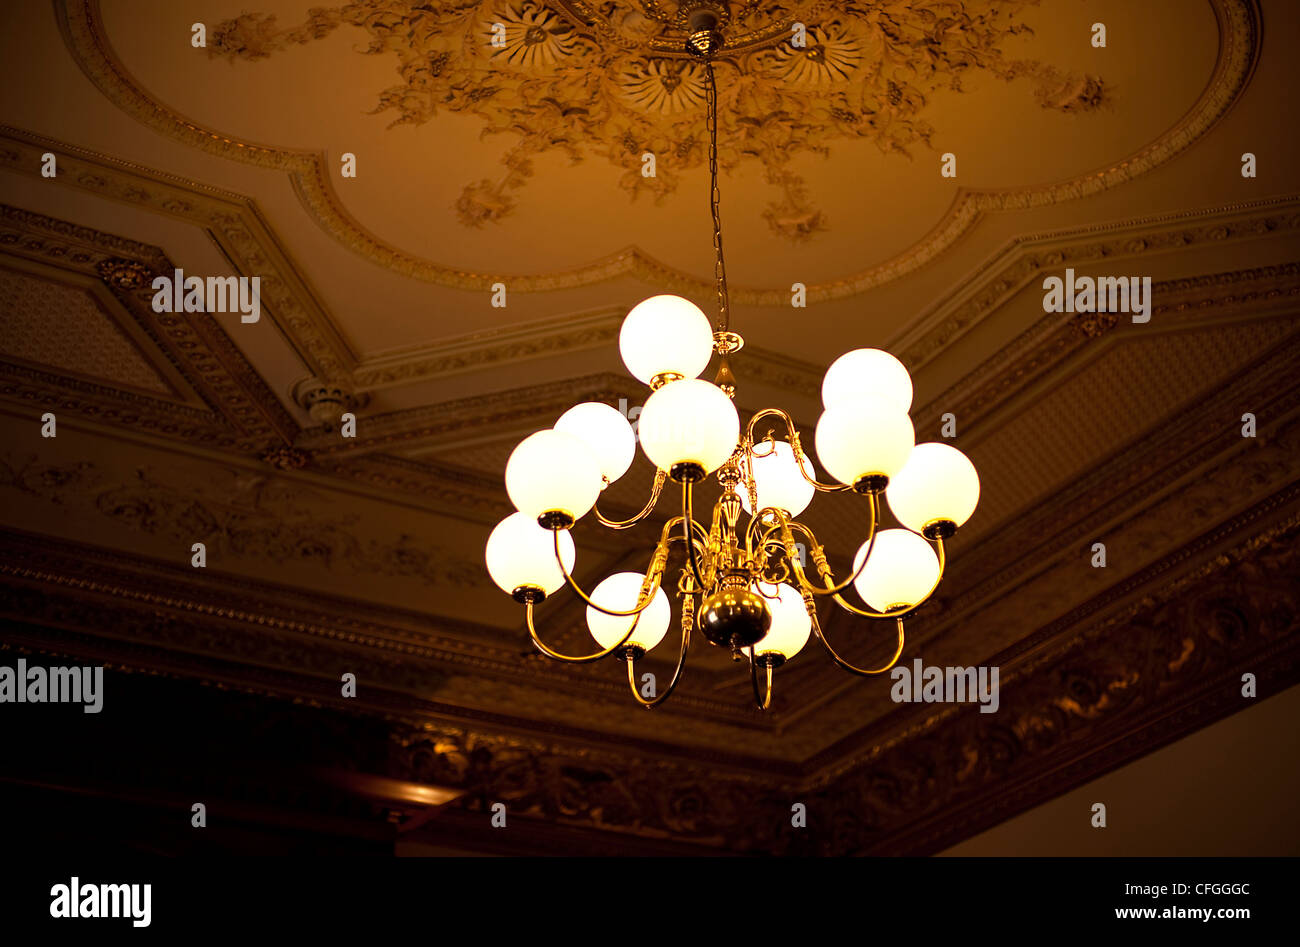 A glass domed light hangs from an ornately decorated ceiling at a registry hall. Stock Photo